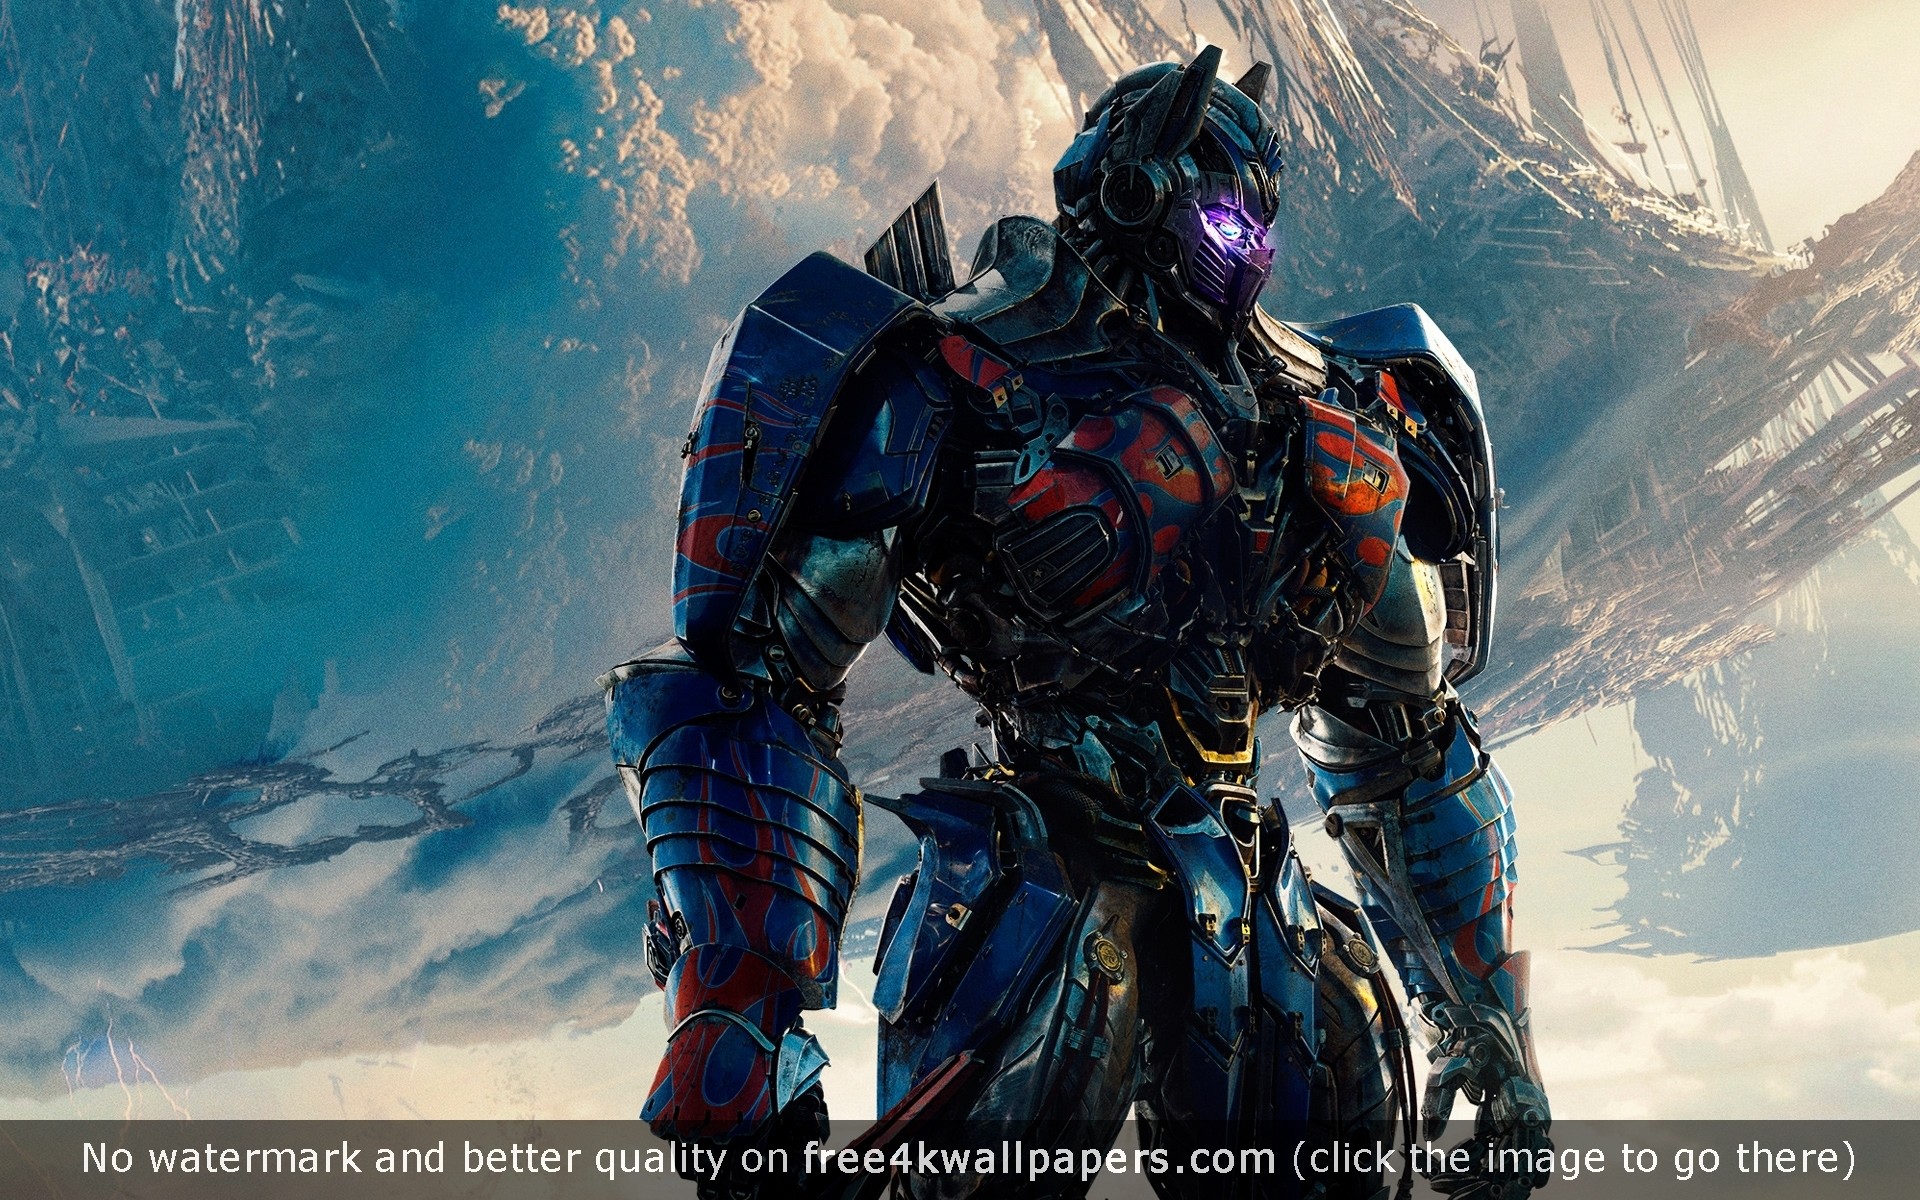 Download Transformers 5 The Last Knight Optimus Prime Wallpaper iPhone 7 Wallpapers HD